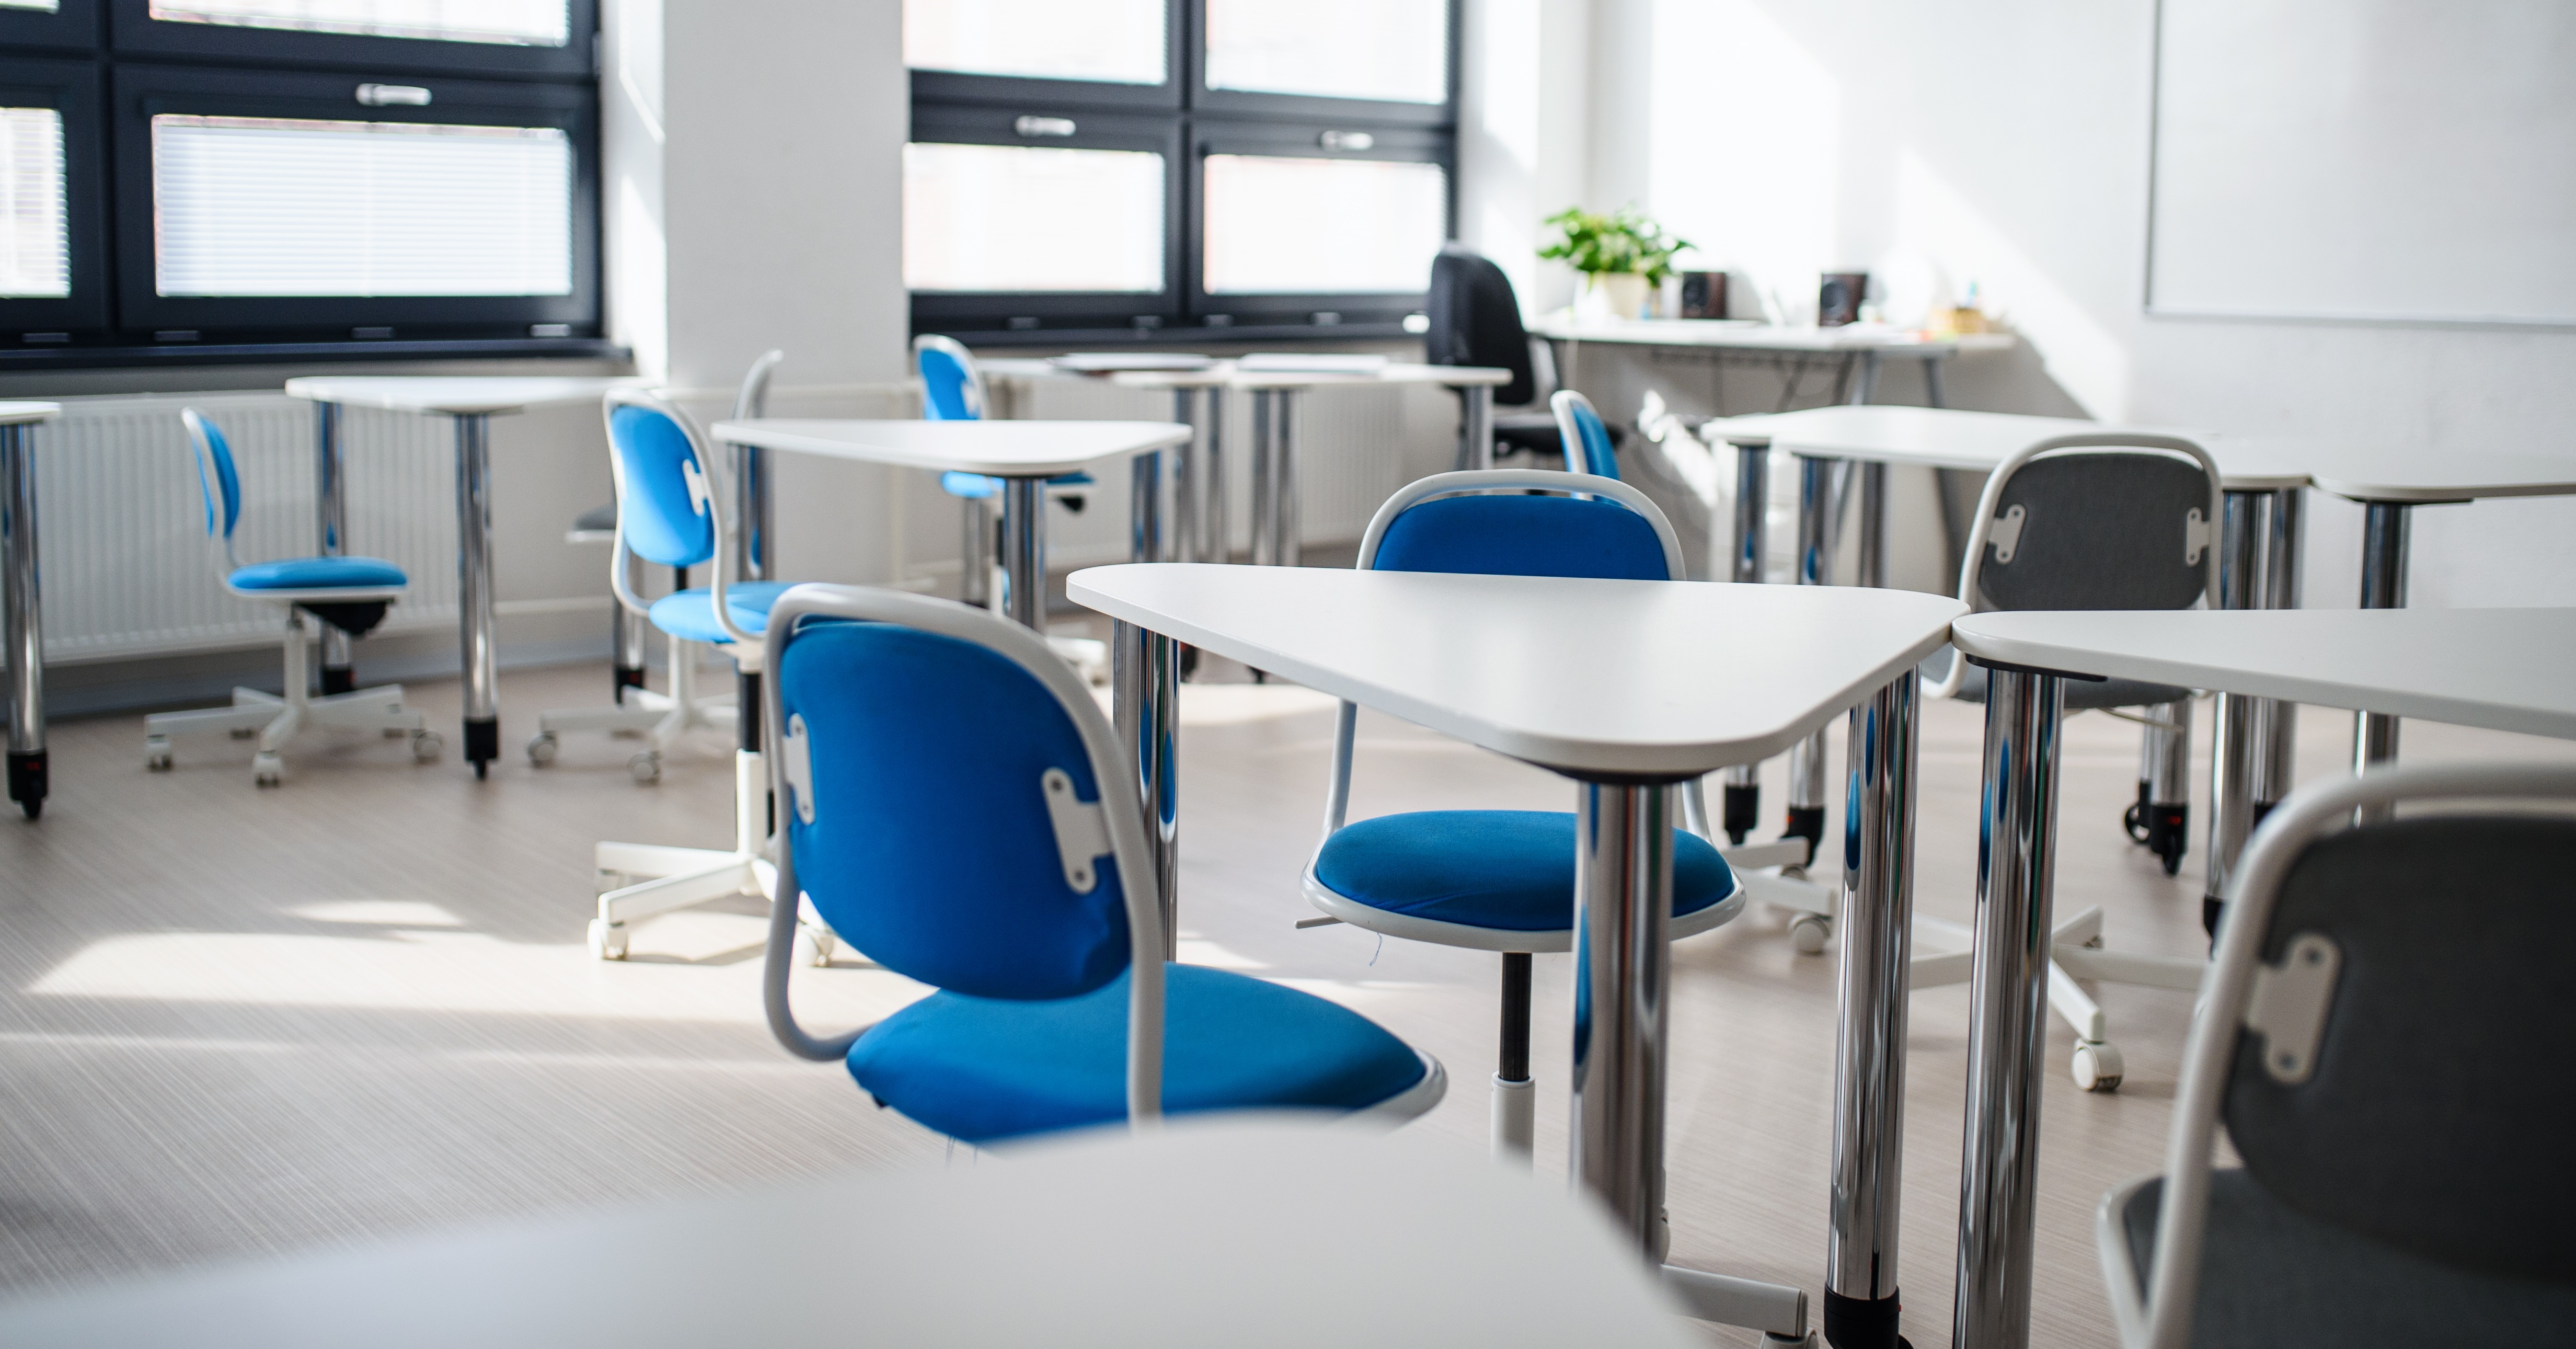 Improve Higher Ed Learning with Active Learning Classrooms